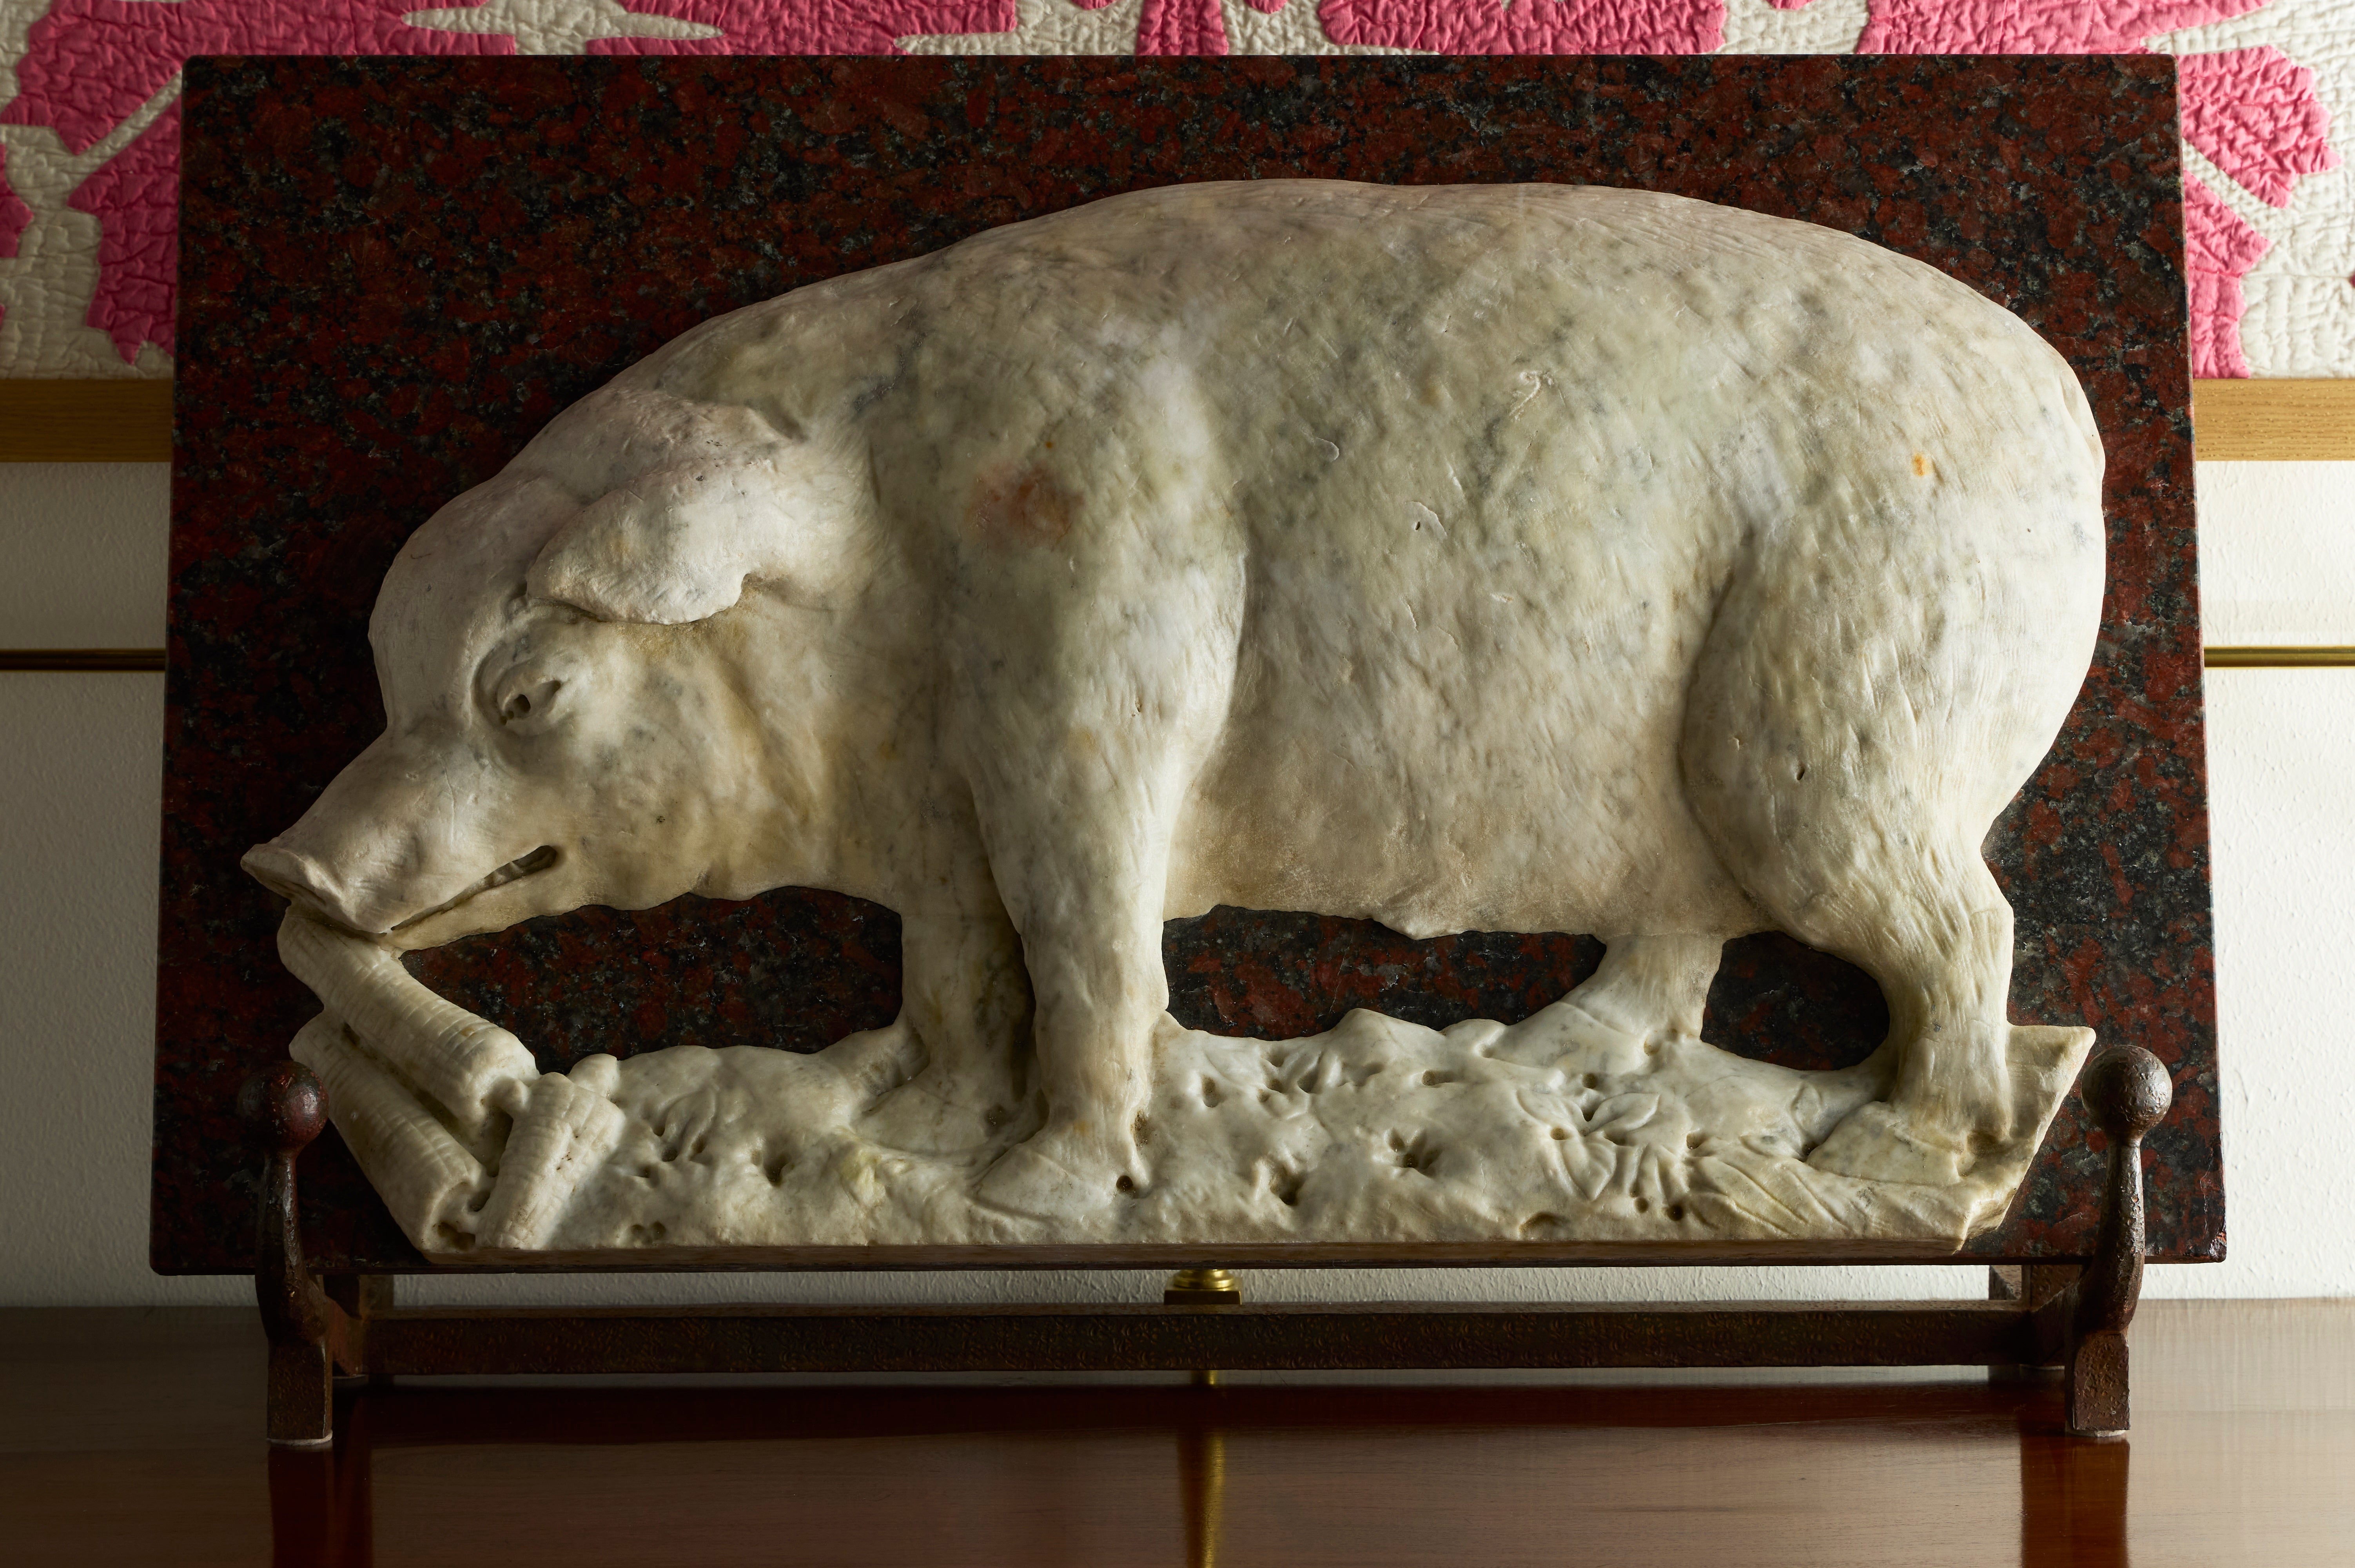 18th Century Bas Relief of a Hog, Carrera Marble on Granite